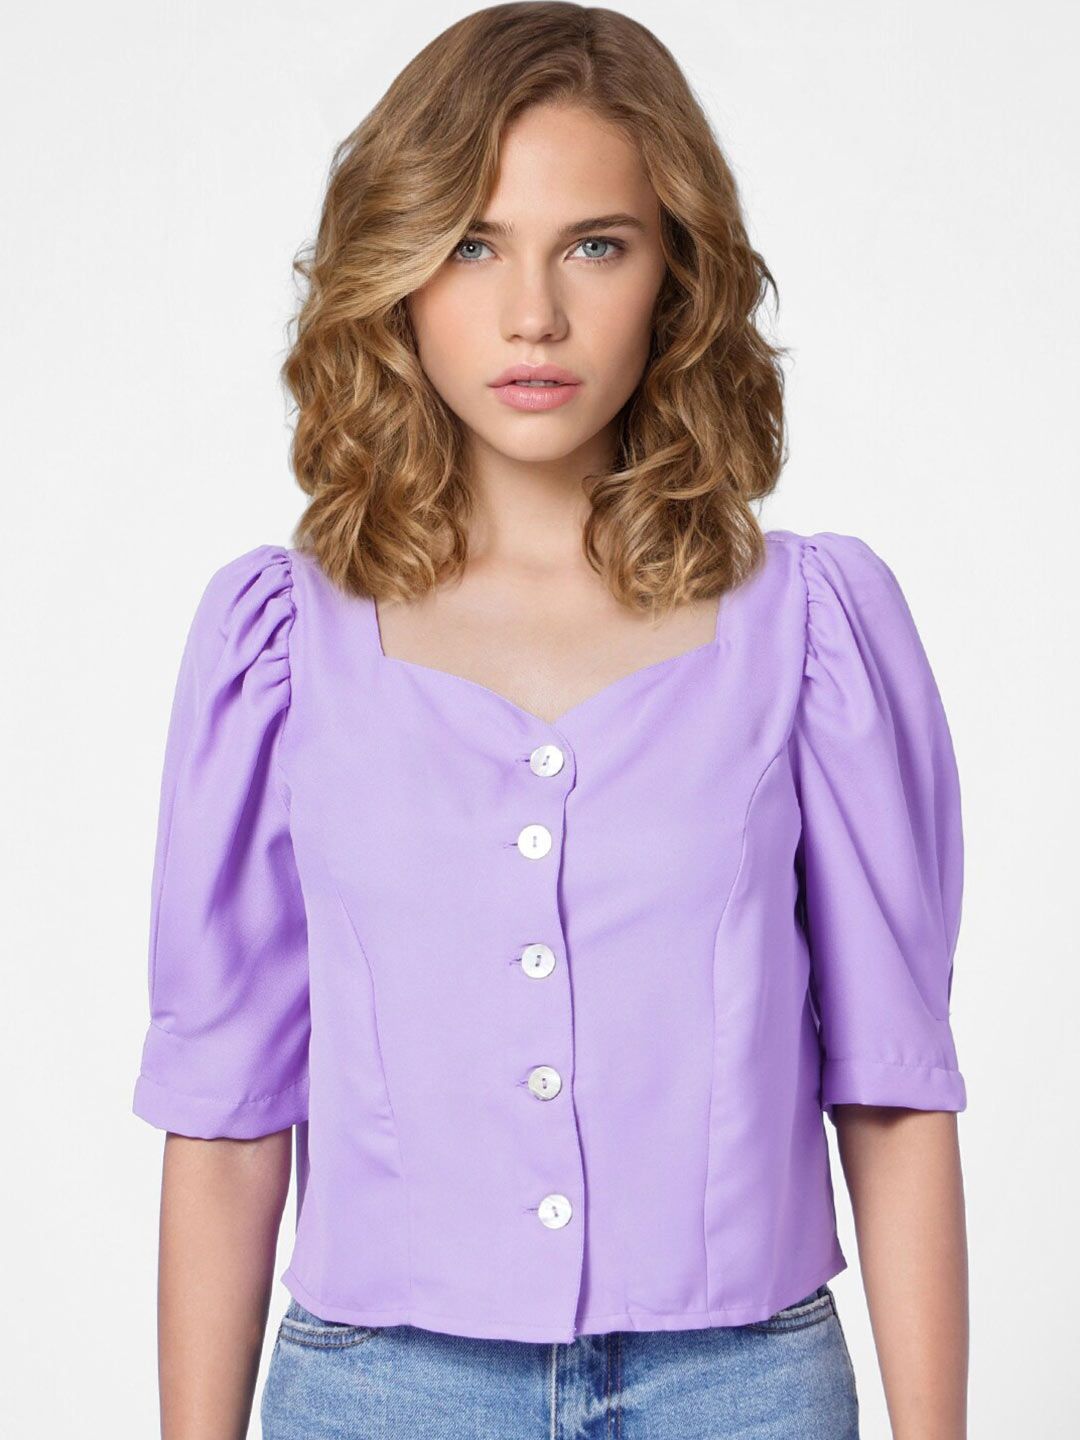 ONLY Women Purple Sweetheart Neck Crop Top Price in India